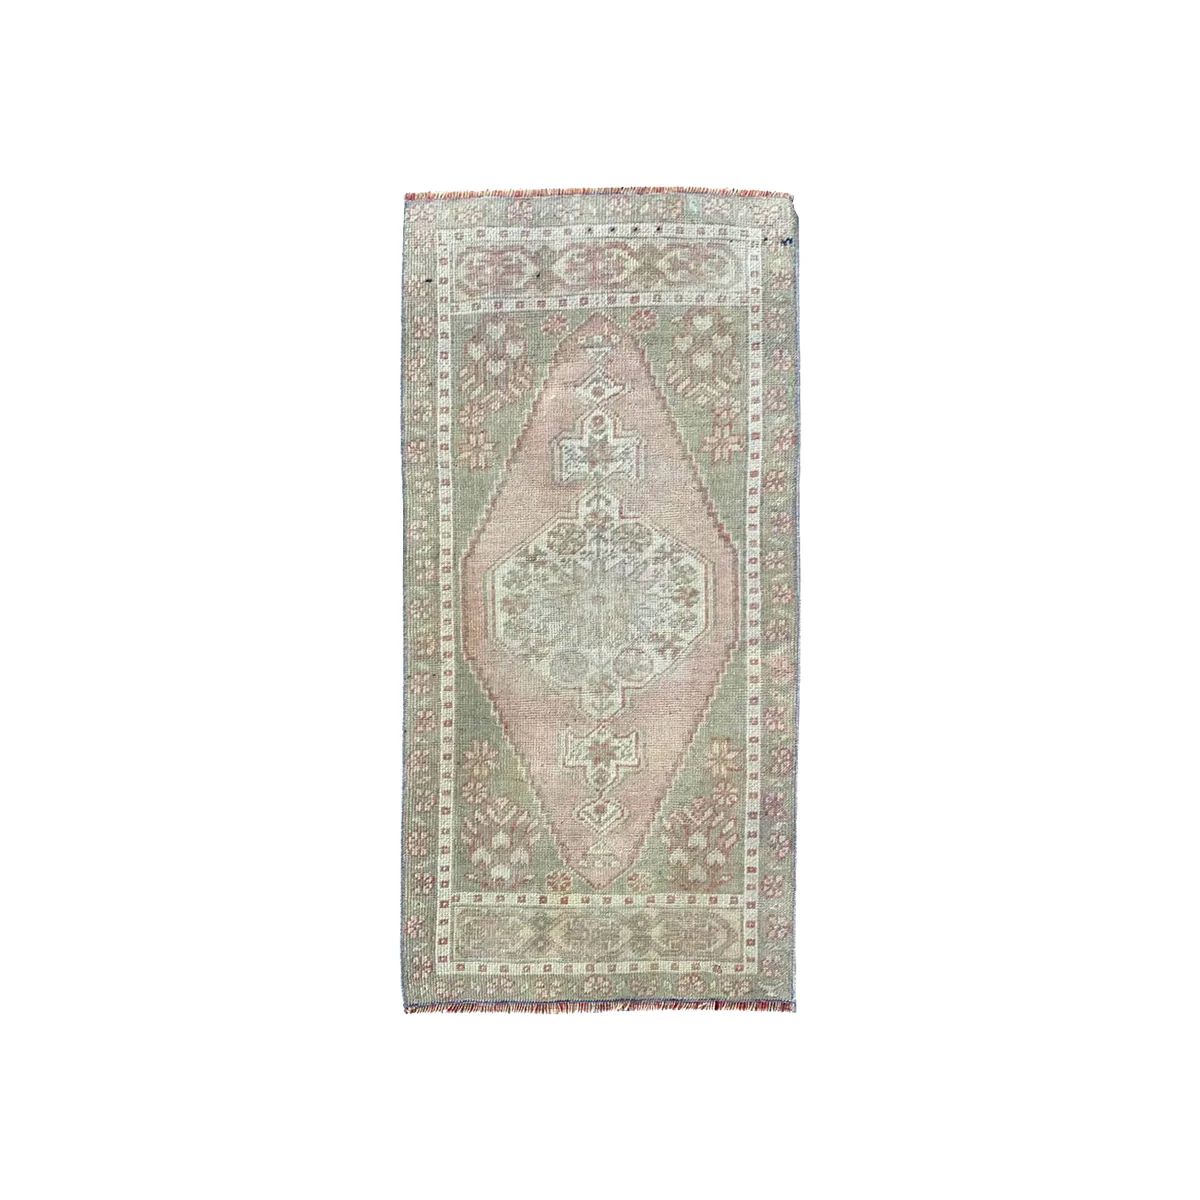 'Roan' Vintage Rug (2 x 4) | Tuesday Made